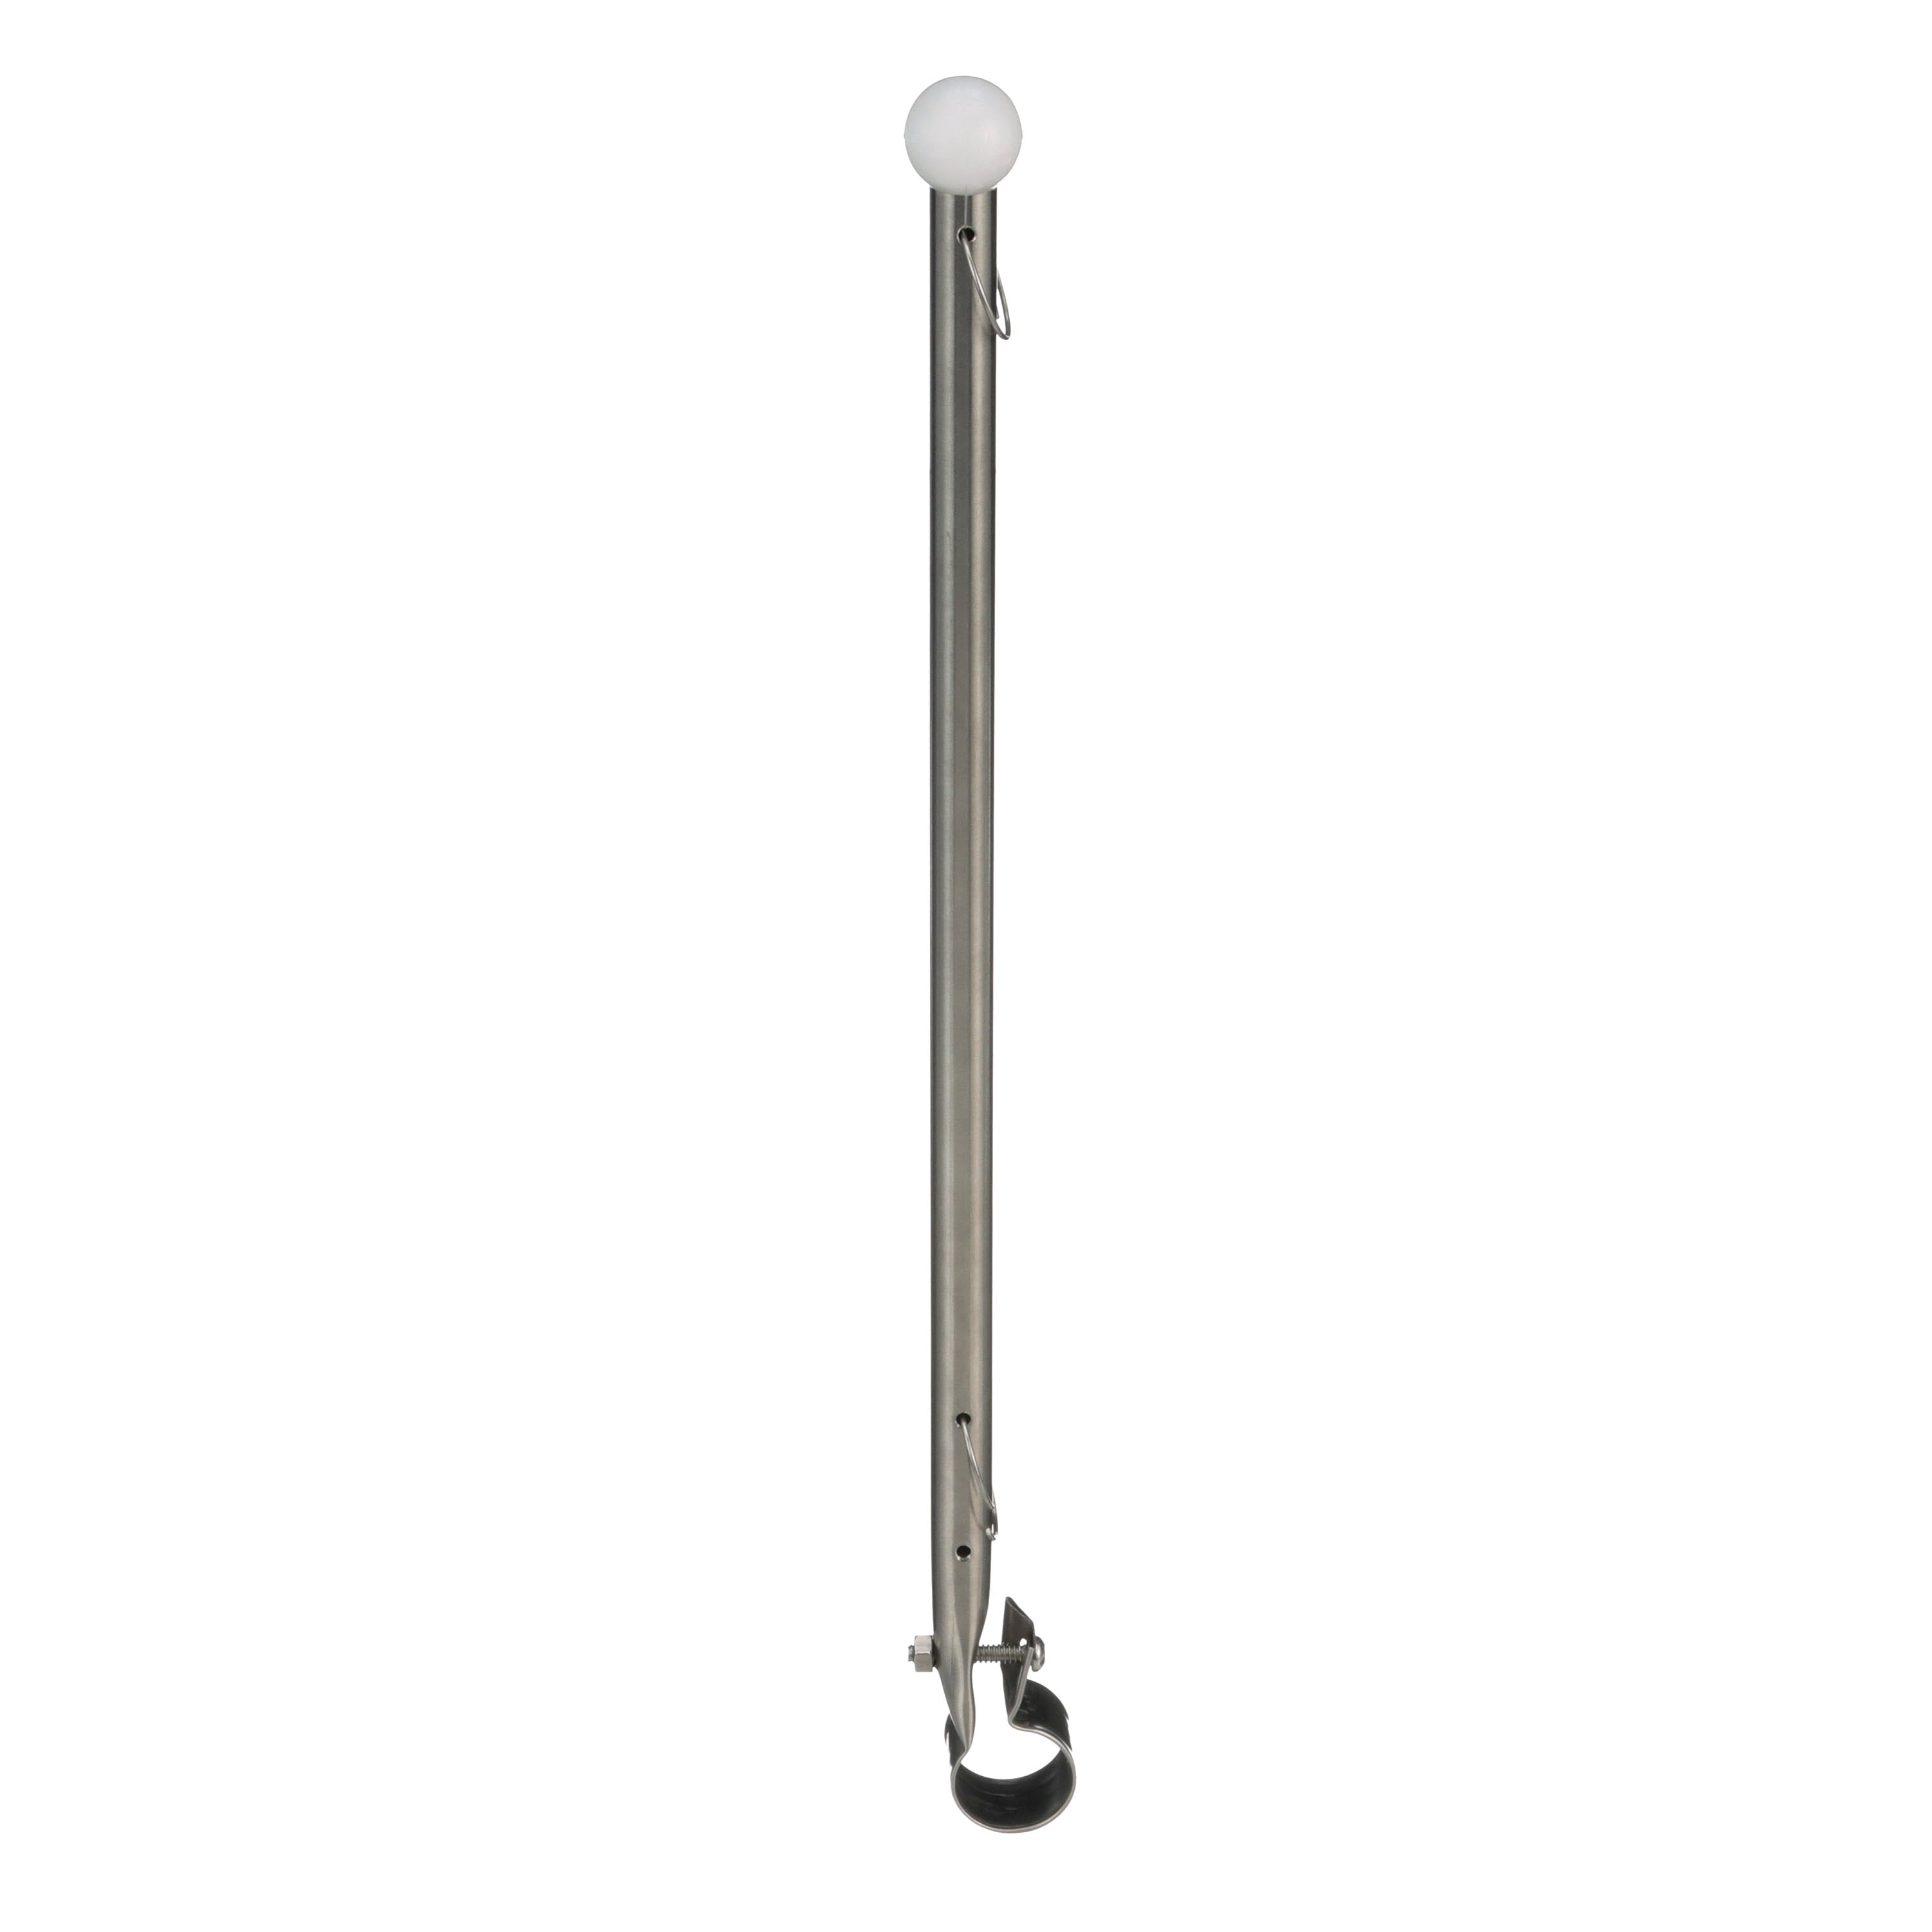 NEW Flag Pole w Round Rail Clamp-on for 7/8" rail  15"L  stainless  77001